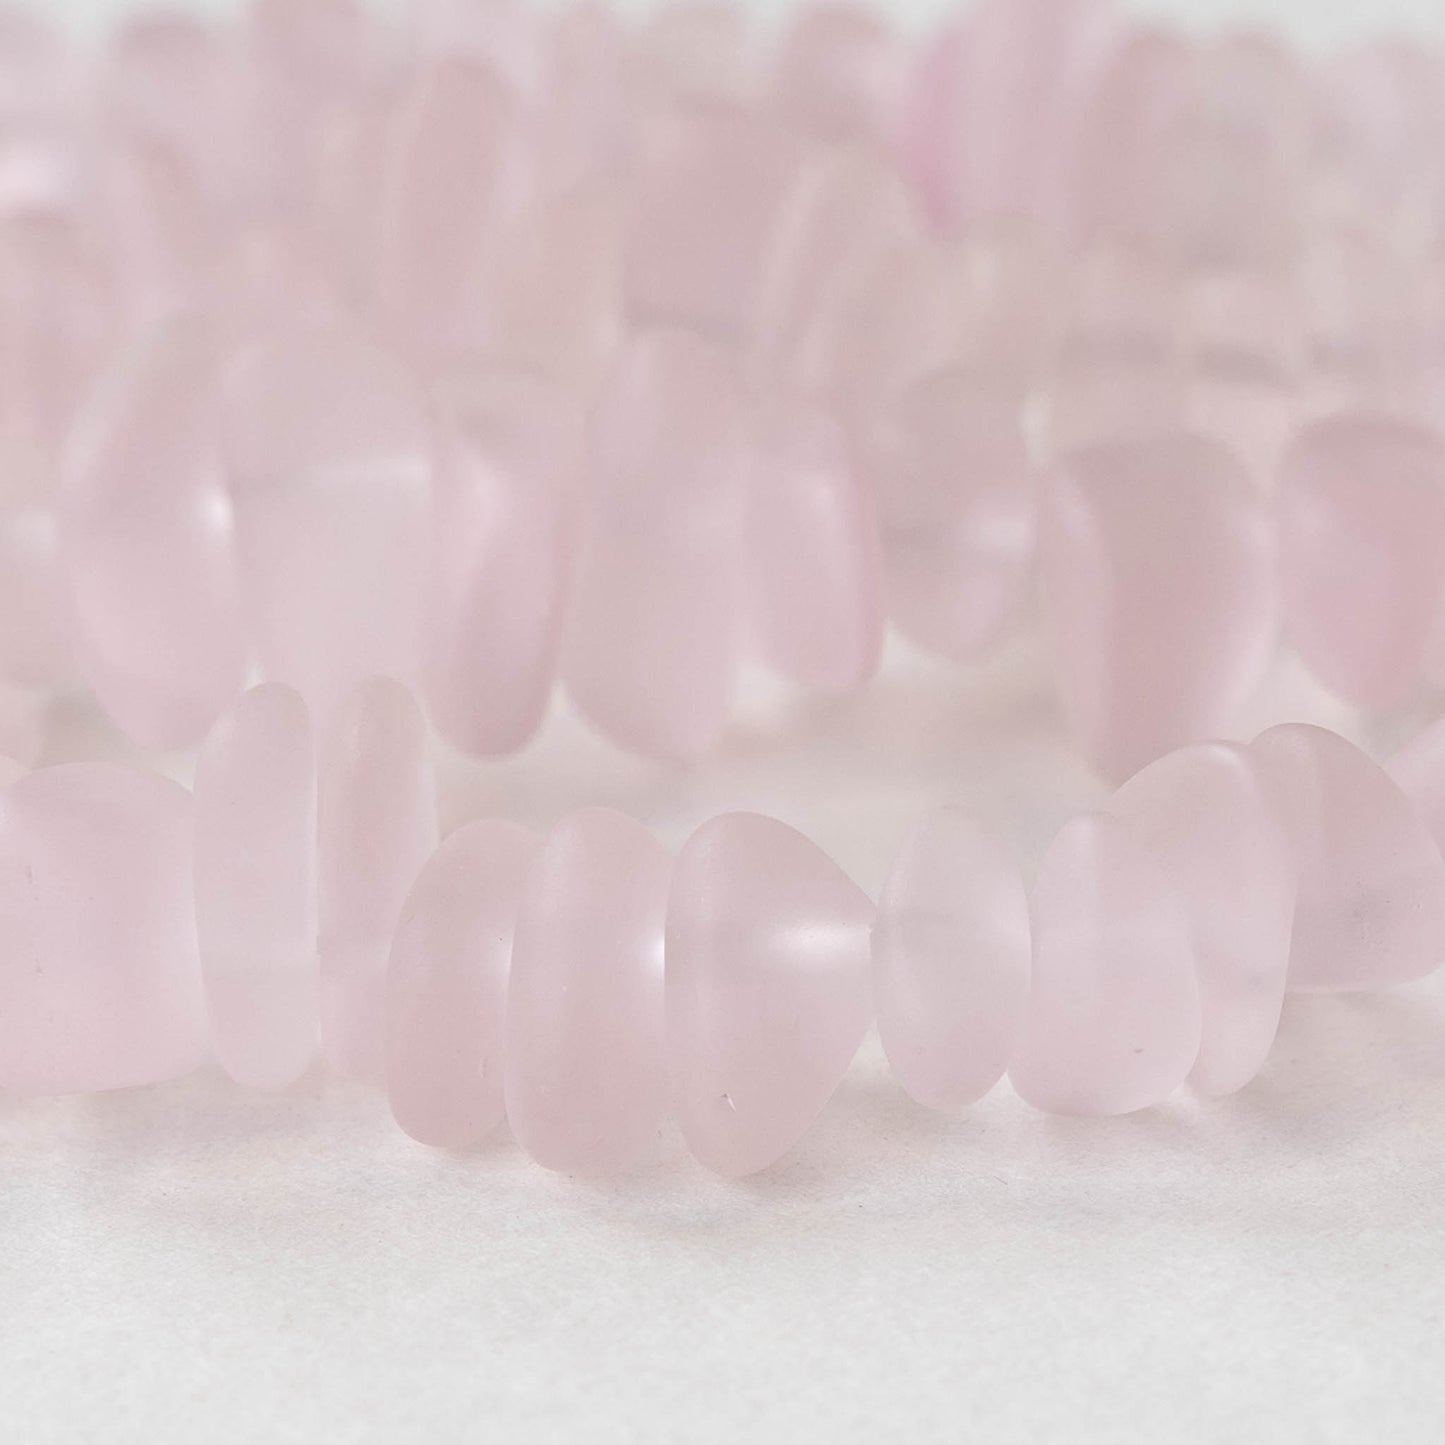 Load image into Gallery viewer, Frosted Glass Pebbles - Pink  - 50 Beads
